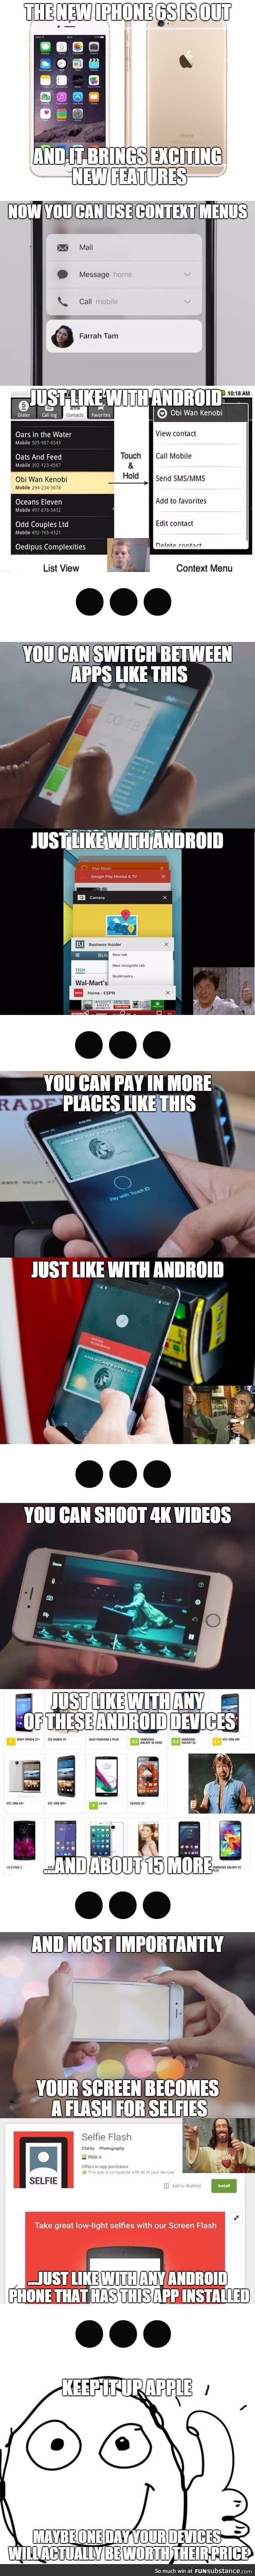 Apple innovation... From Android